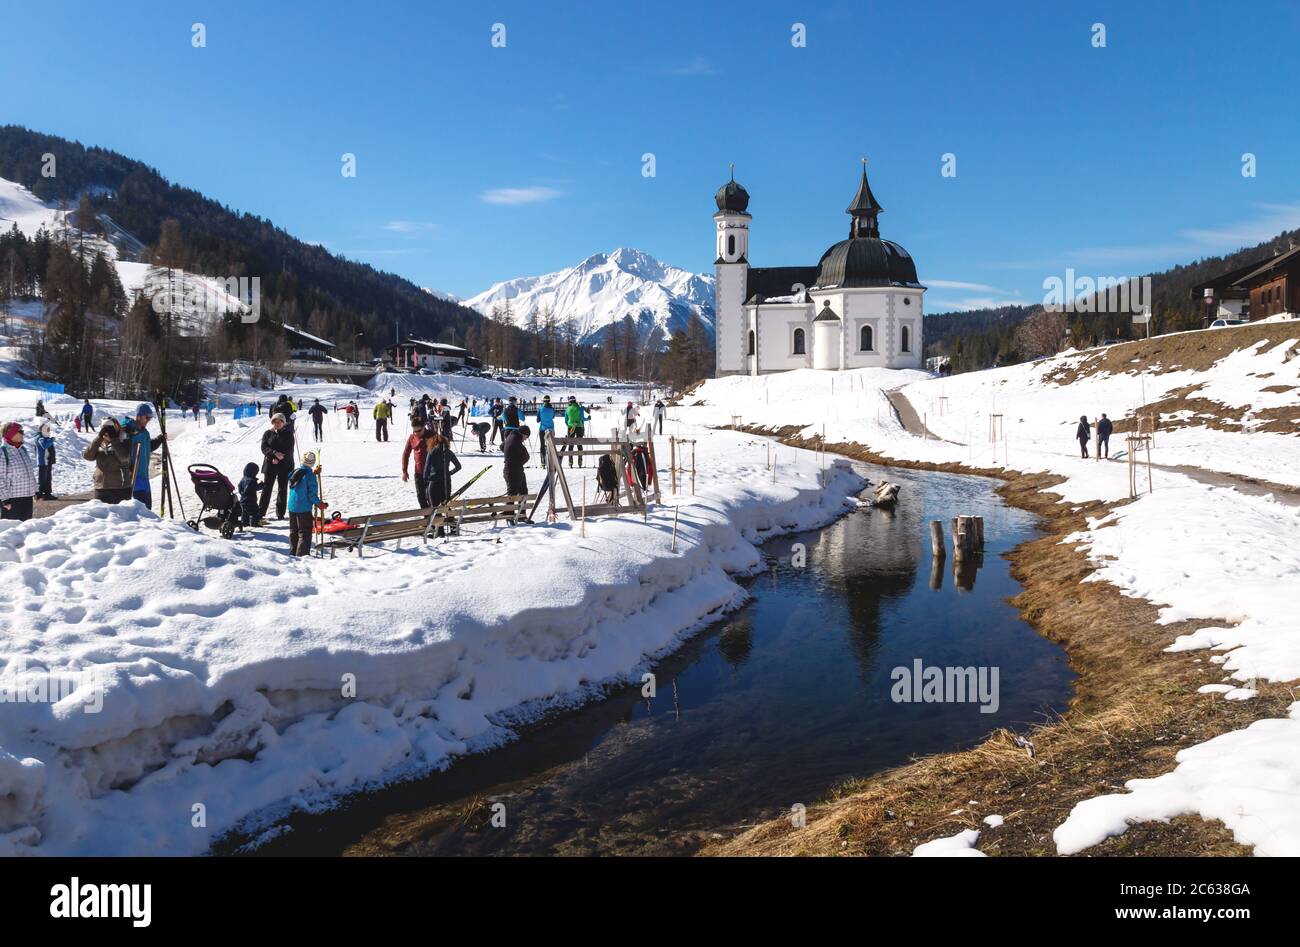 Seefeld, Tirol, Austria - 8 March 2020: Cross-country skiers on sunny track along a river and a pitoresque church reflecting in the water Stock Photo